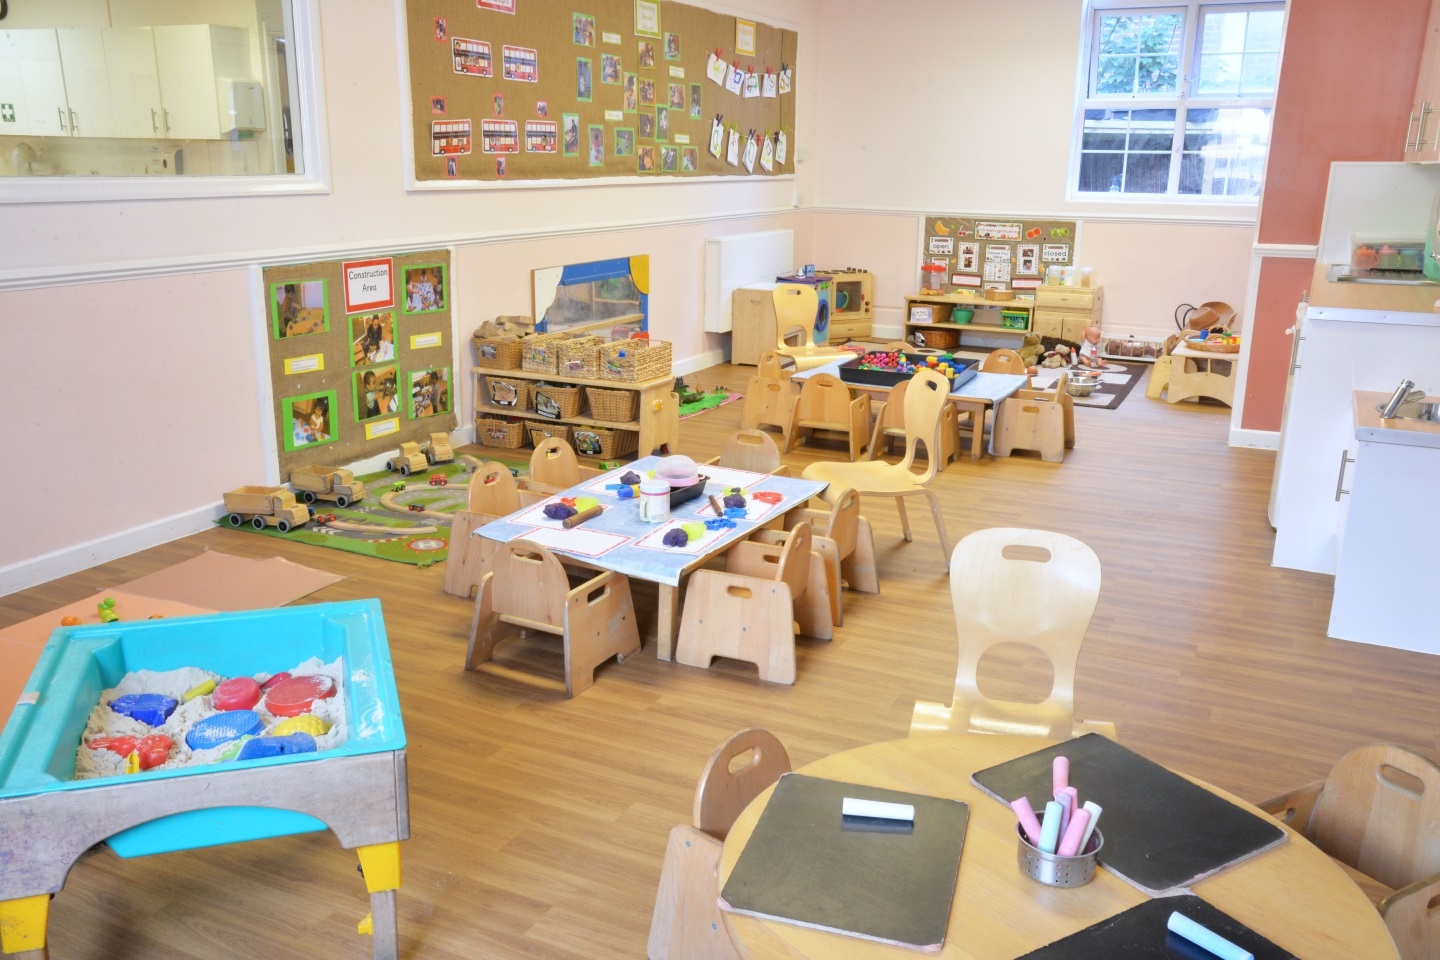 Bright Horizons Hounslow Day Nursery and Preschool Middlesex 03300 579159